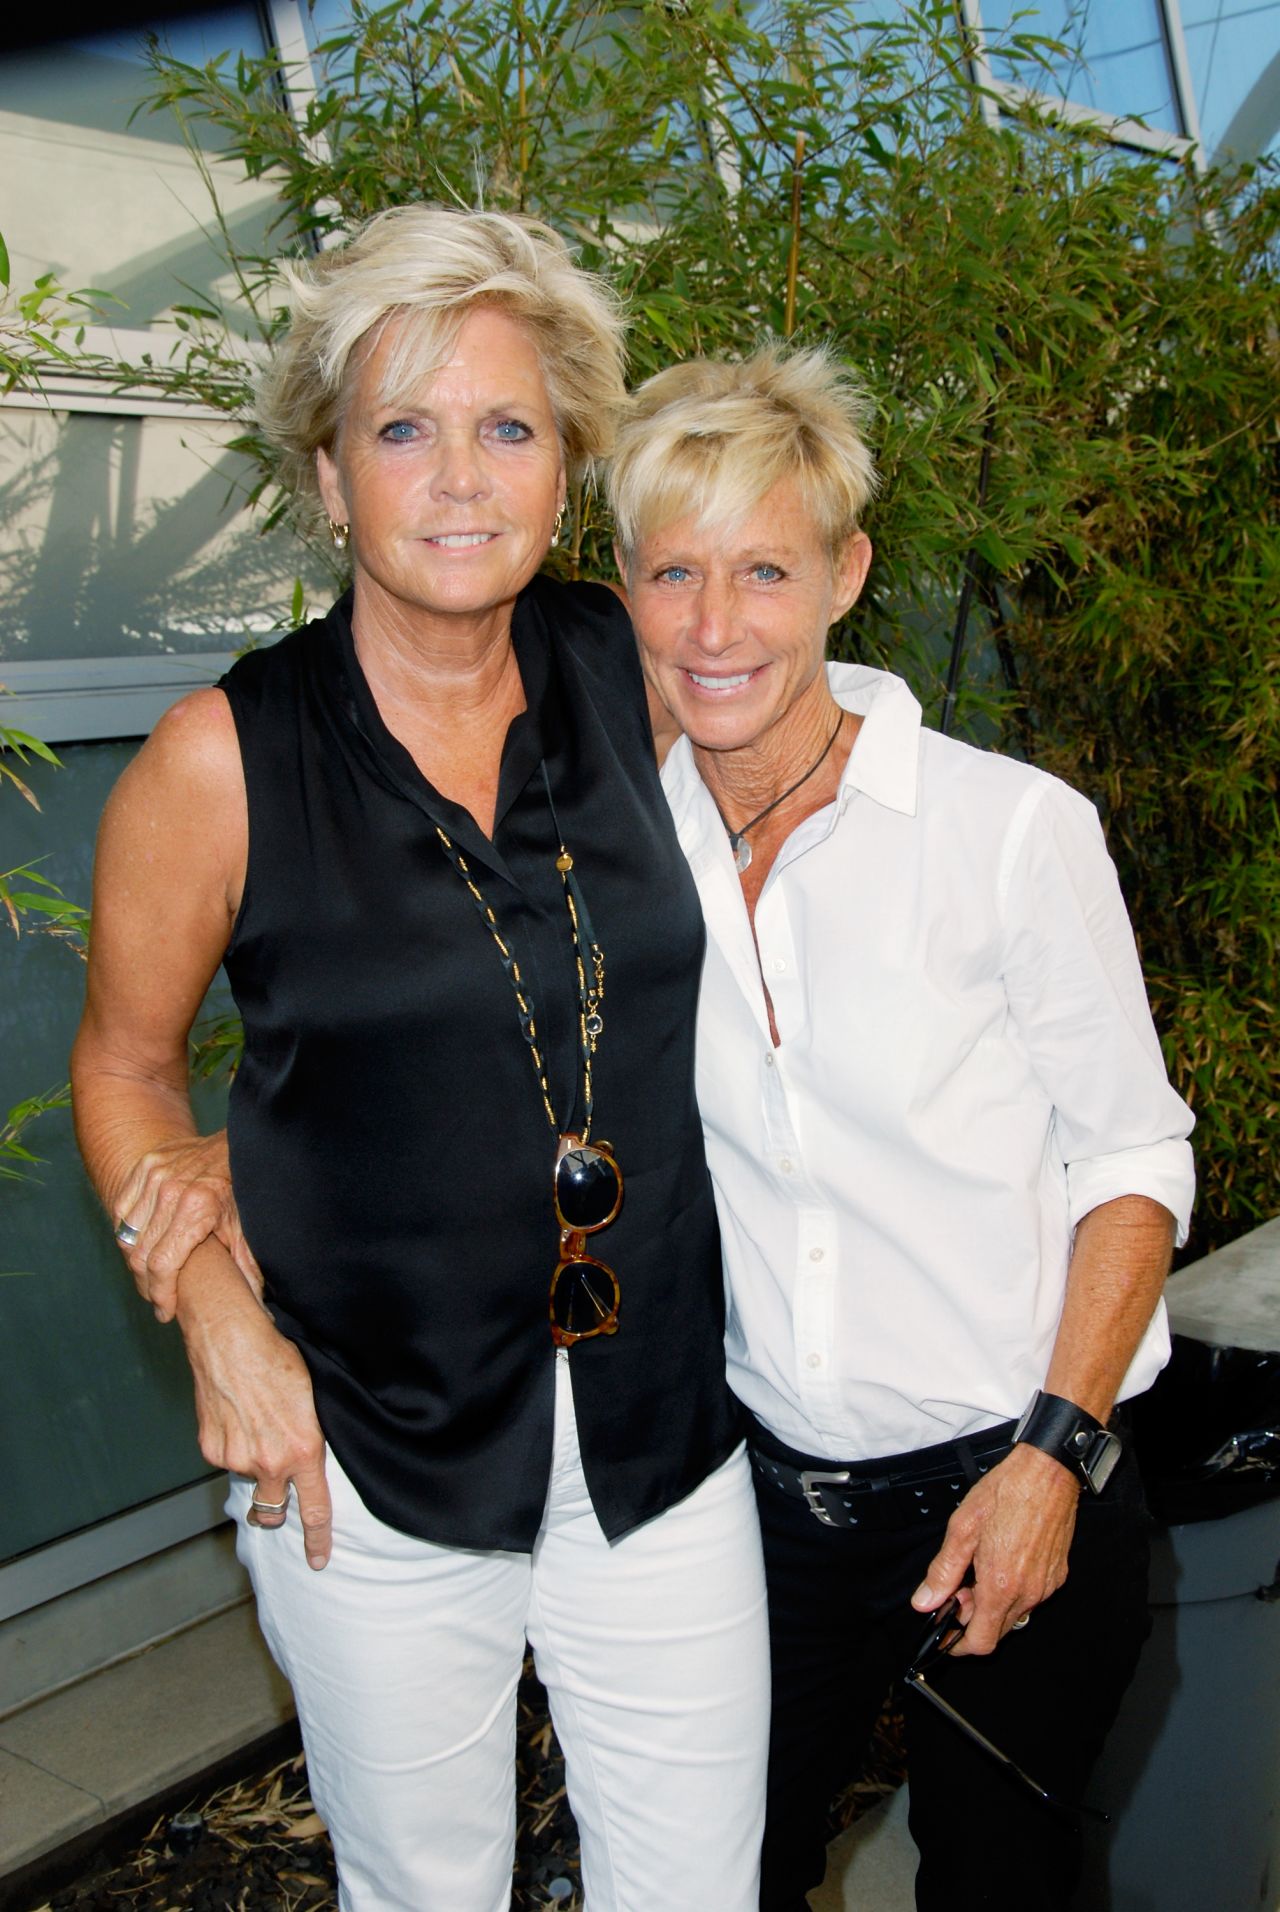 Former "Family Ties" star Meredith Baxter, left, reportedly tied the knot with girlfriend Nancy Locke in December 2013. <a href="http://www.people.com/people/article/0,,20764010,00.html" target="_blank" target="_blank">According to People magazine</a>, the couple wed in an intimate ceremony in Los Angeles. Baxter, 66,<a href="http://www.cnn.com/2009/SHOWBIZ/TV/12/02/meredith.baxter.lesbian.mom/index.html?iref=allsearch"> confirmed</a> rumors about her sexuality in 2009, plainly telling the "Today" show, "Yes, I'm a lesbian." 